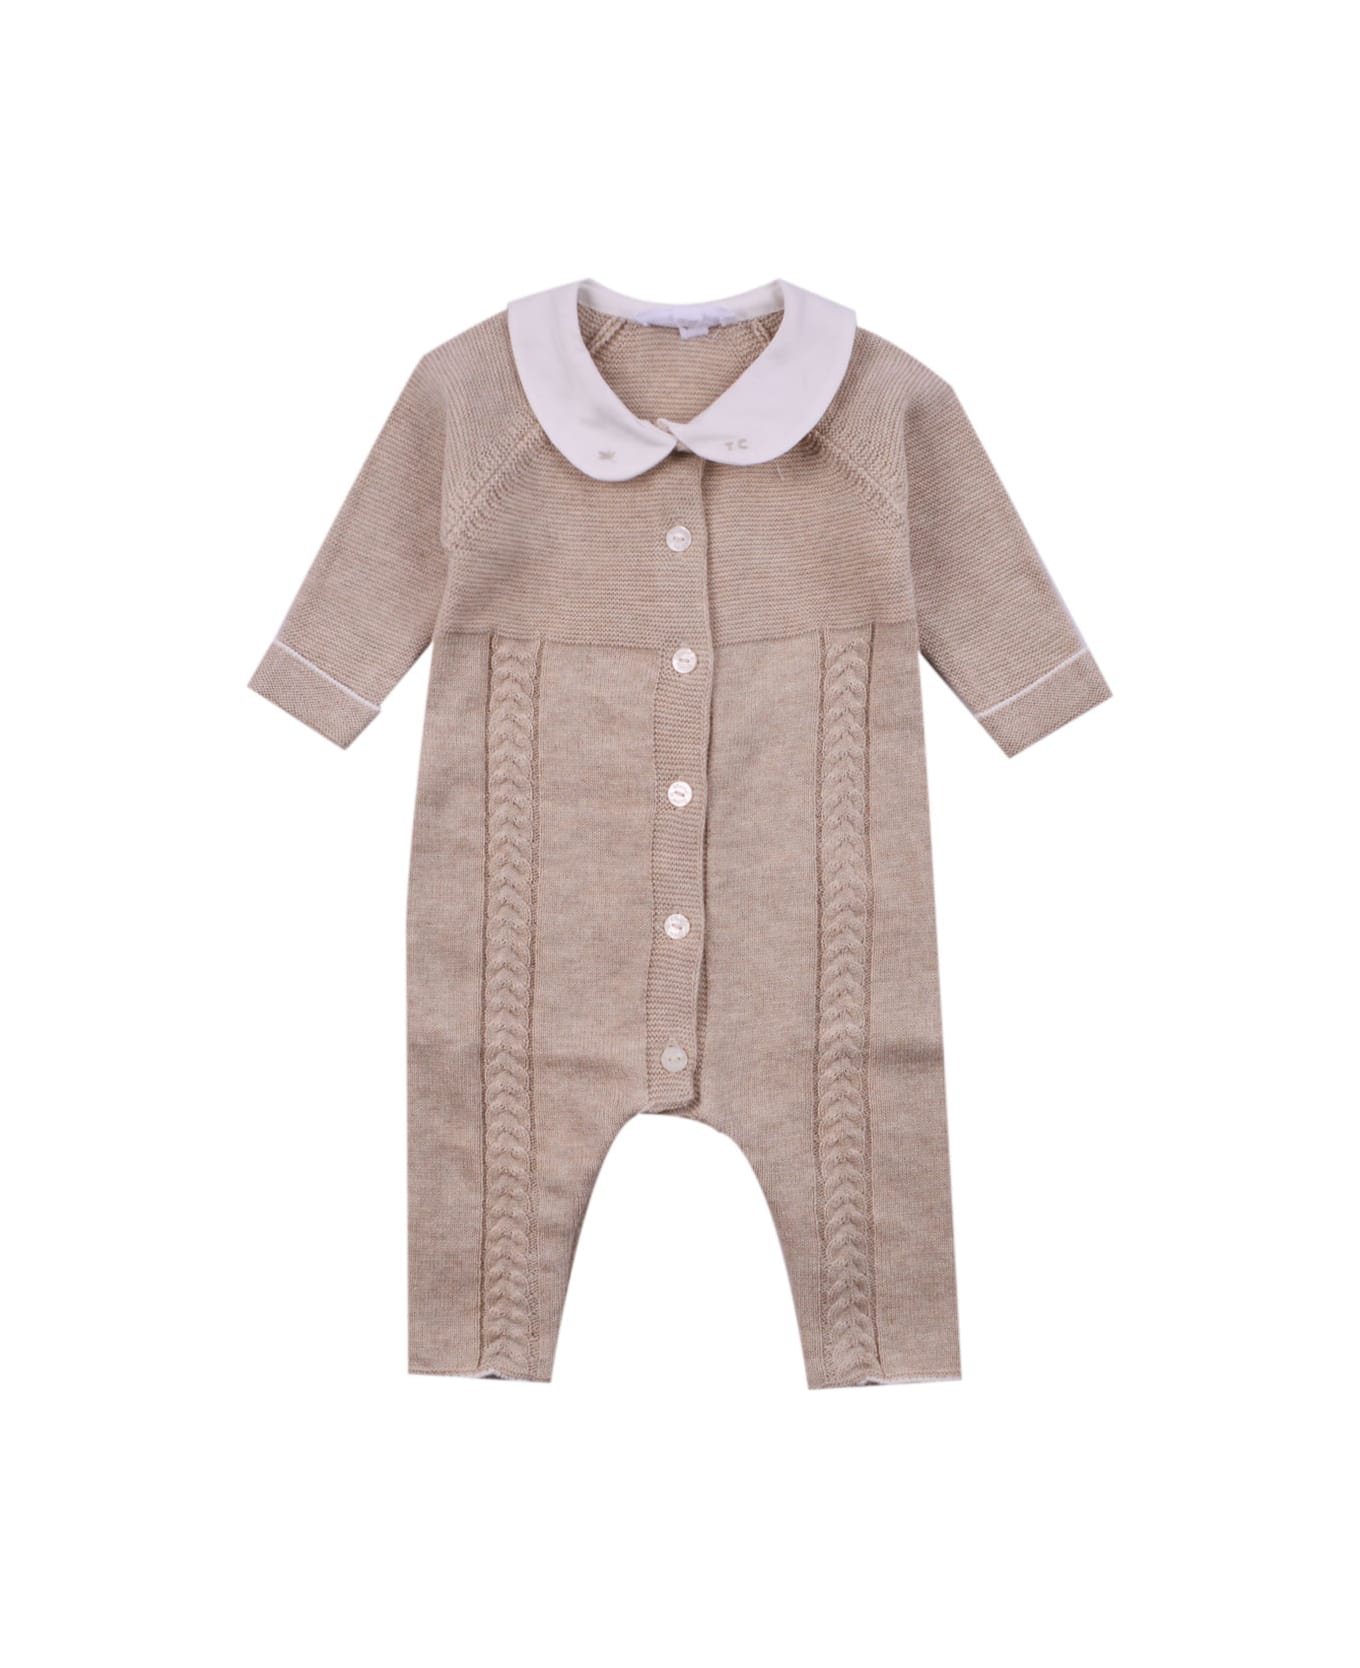 Tartine et Chocolat Knitted Romper With Embroidered Collar - Beige